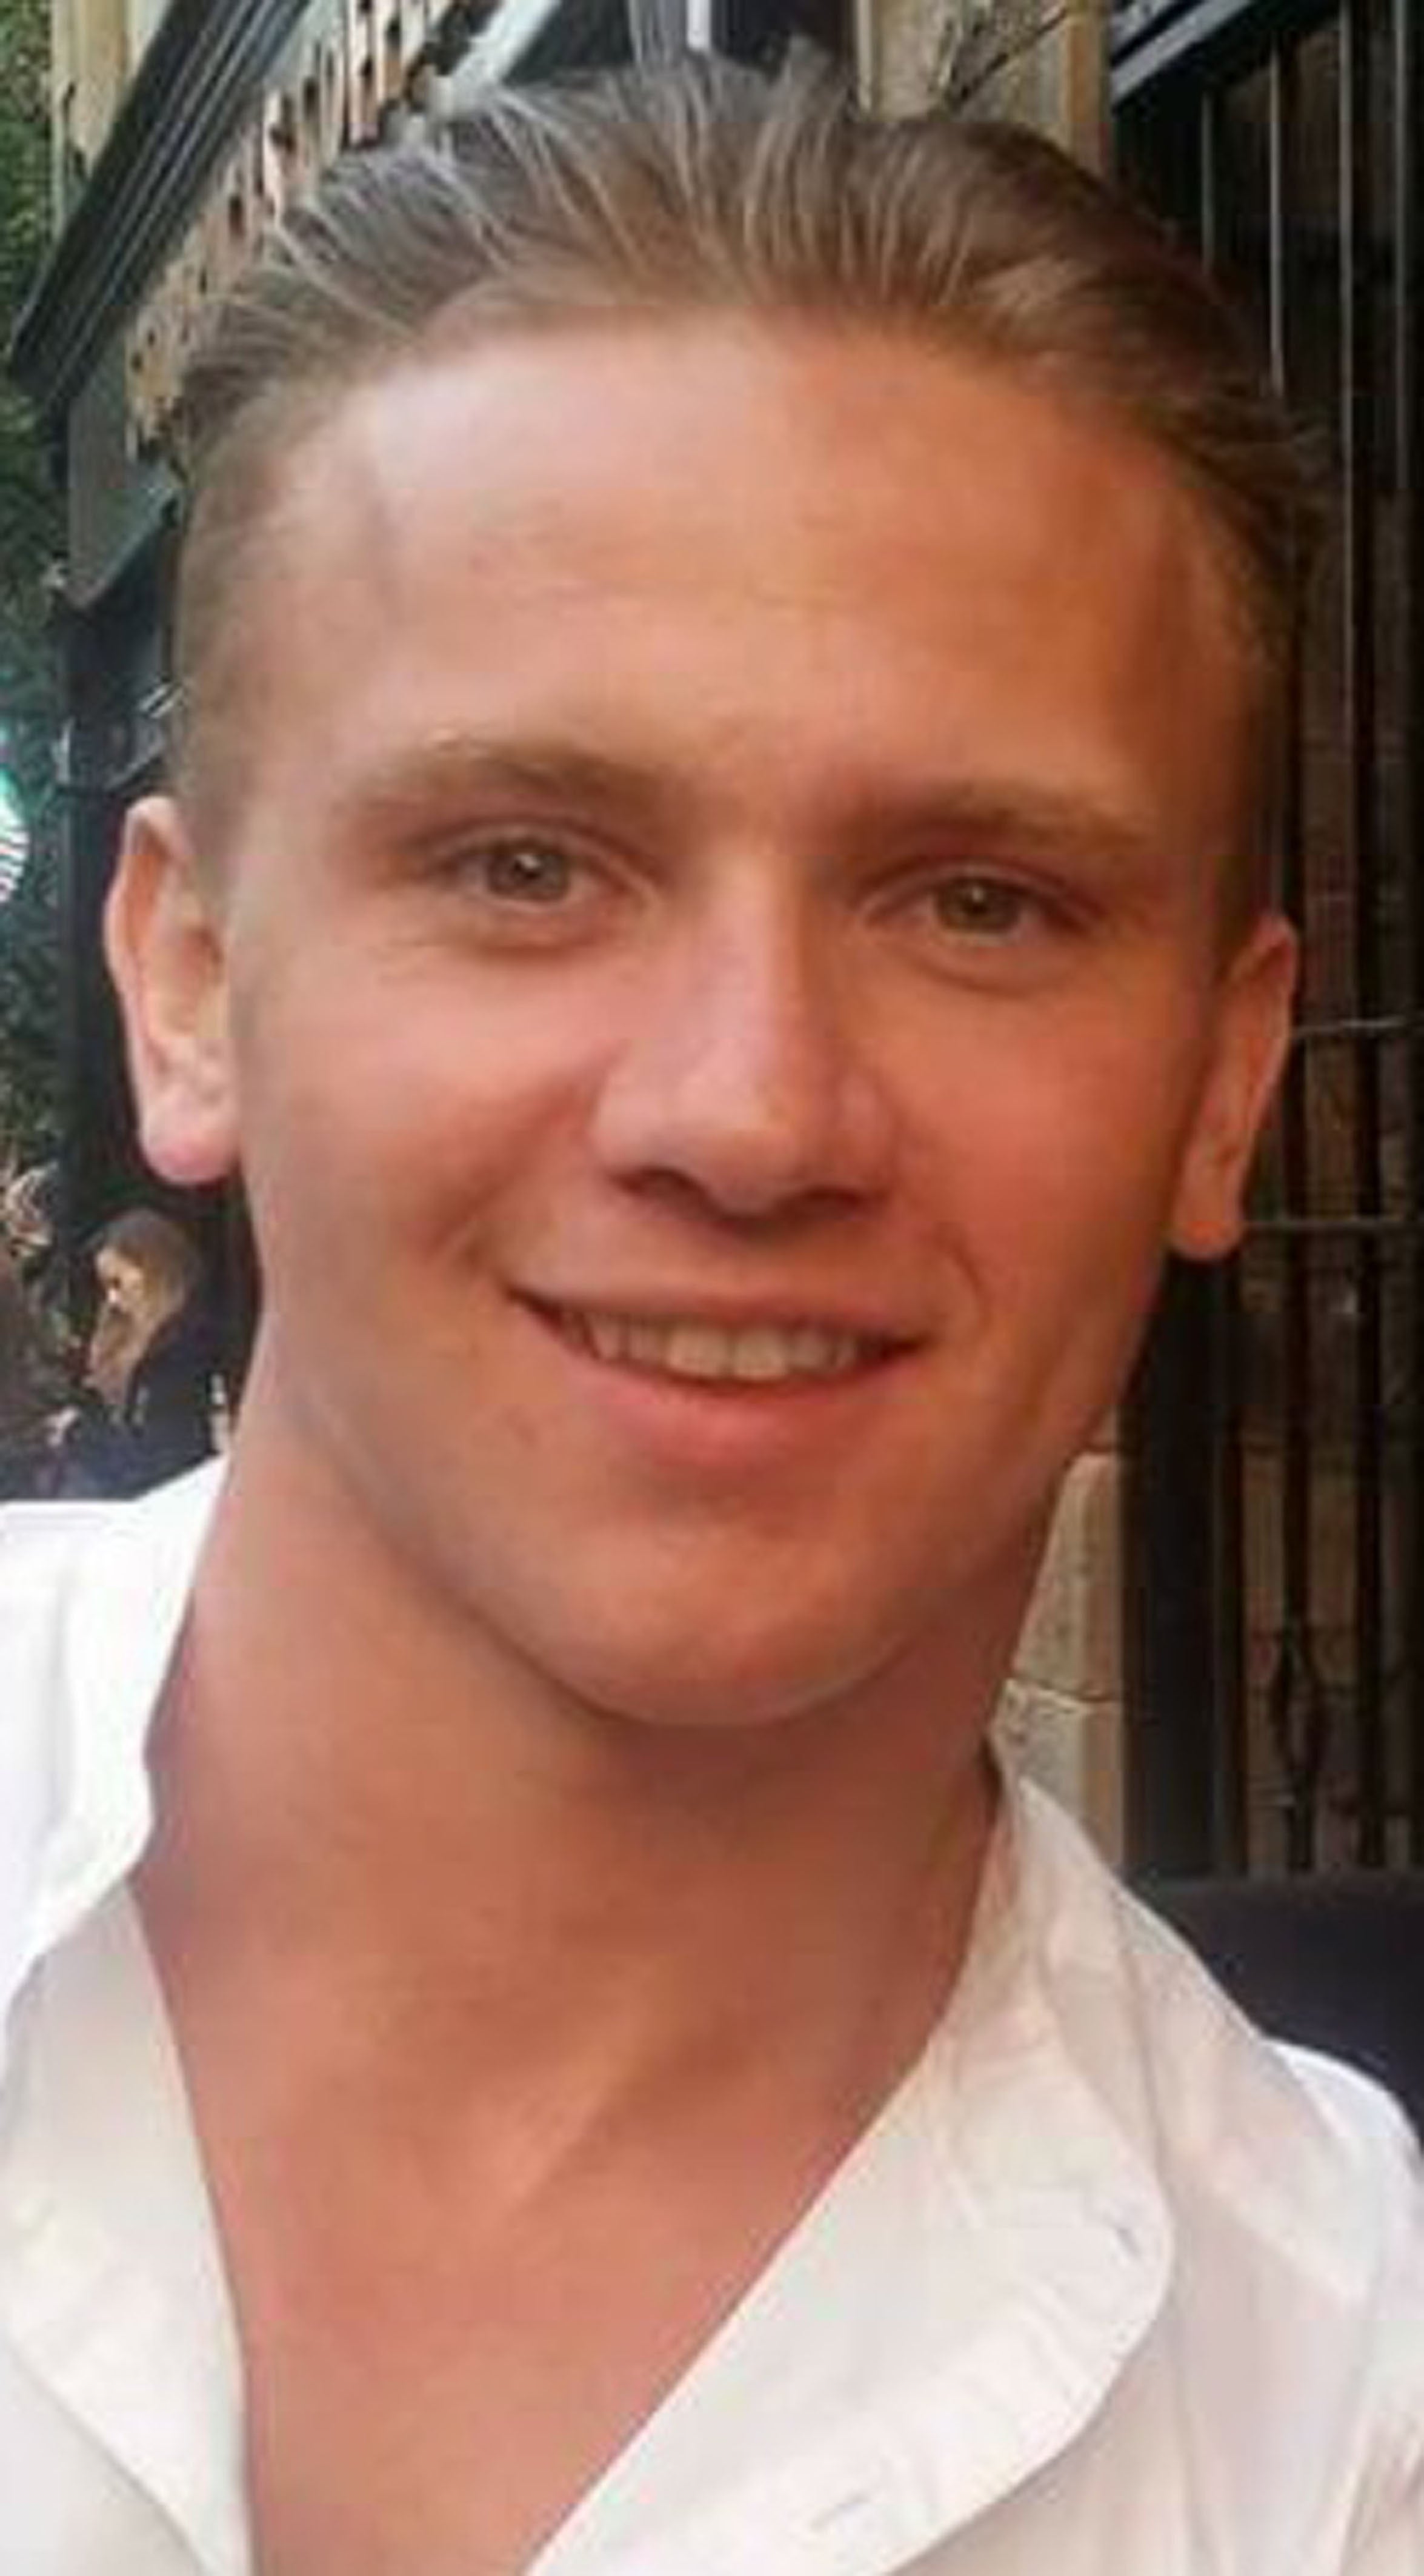 Corrie McKeague vanished after a night out in Bury St Edmunds in September 2016 (Suffolk Police/PA)